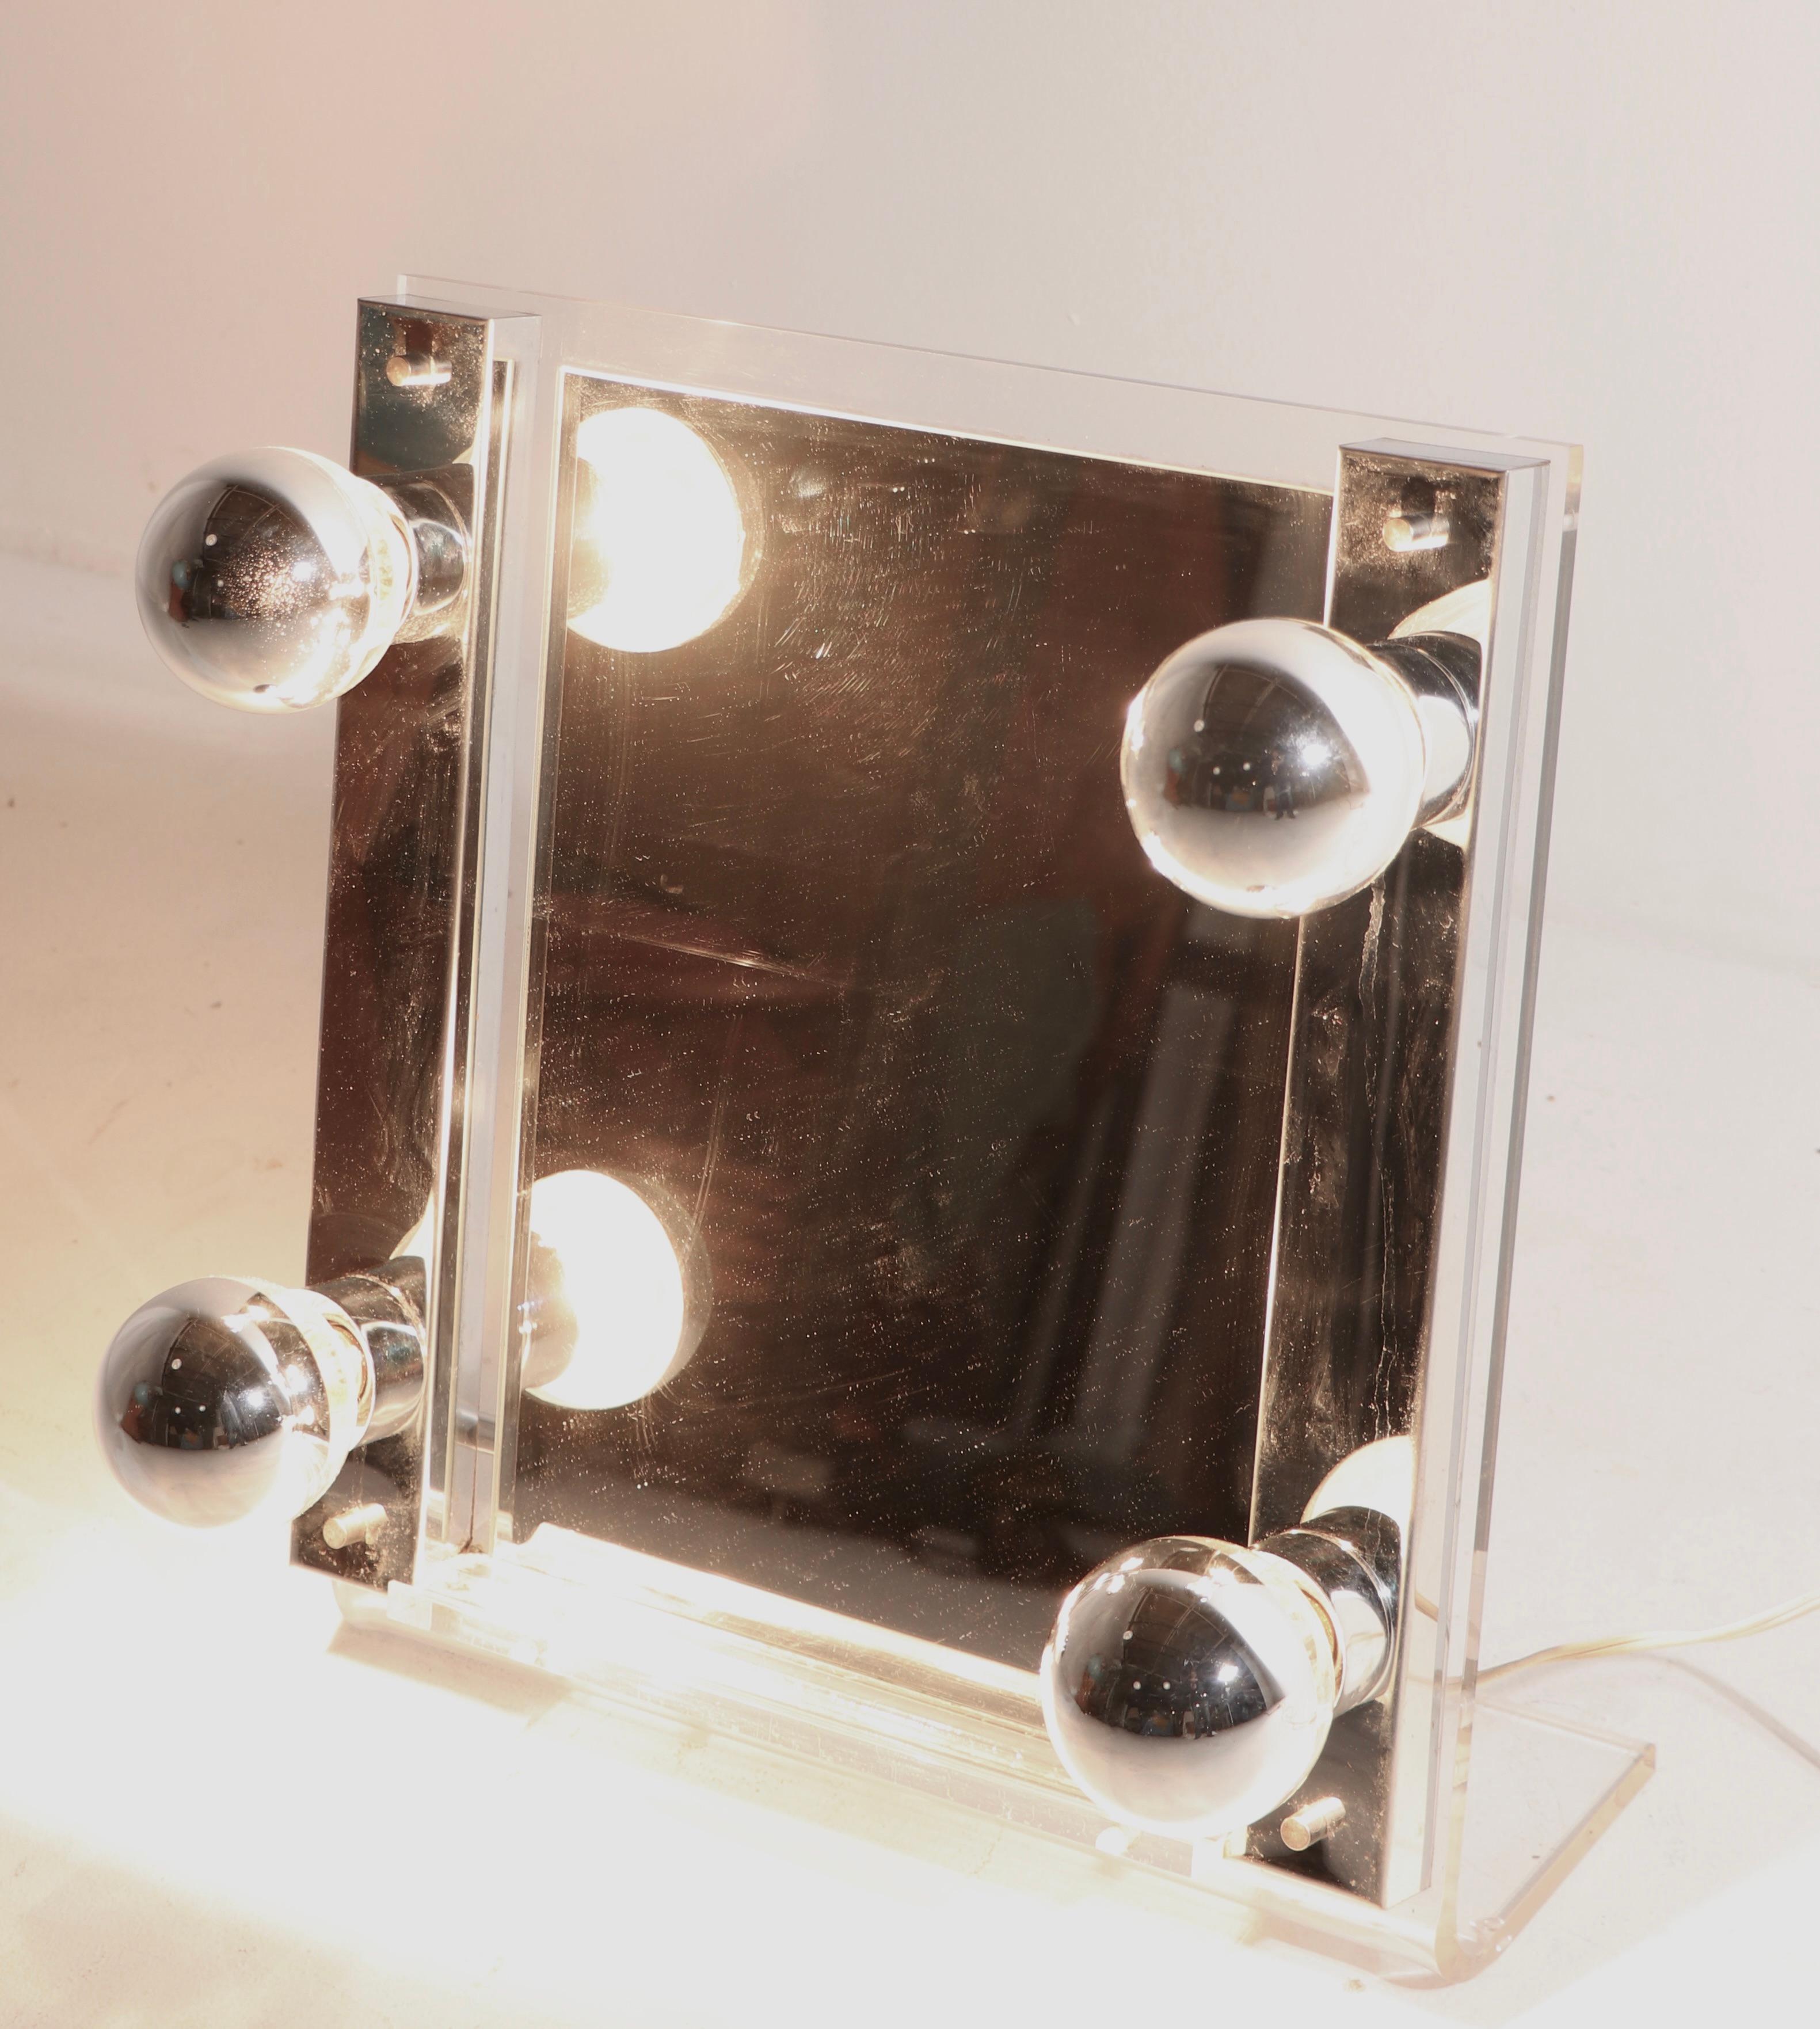 High Style Art Deco Revival make up mirror, table top, vanity mirror. This example features light up bulbs mounted on a canted lucite and chrome frame, which surround the rectangular mirror. Clean, original, and working condition, total glam style,